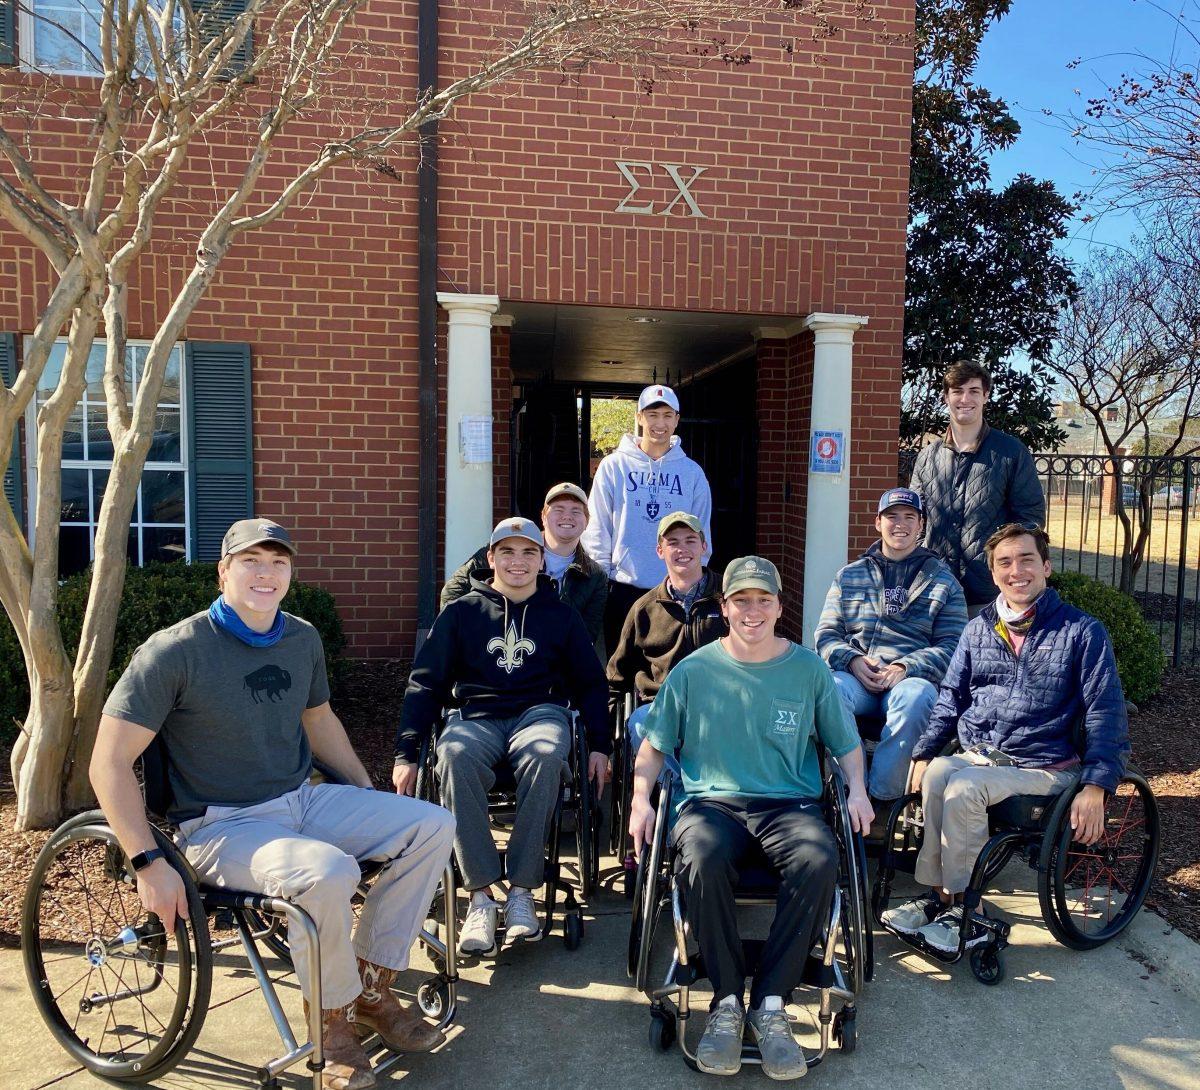 MSU student Thomas Guest poses with participants of the Come Roll with Me program held at the Sigma Chi house on February 2.